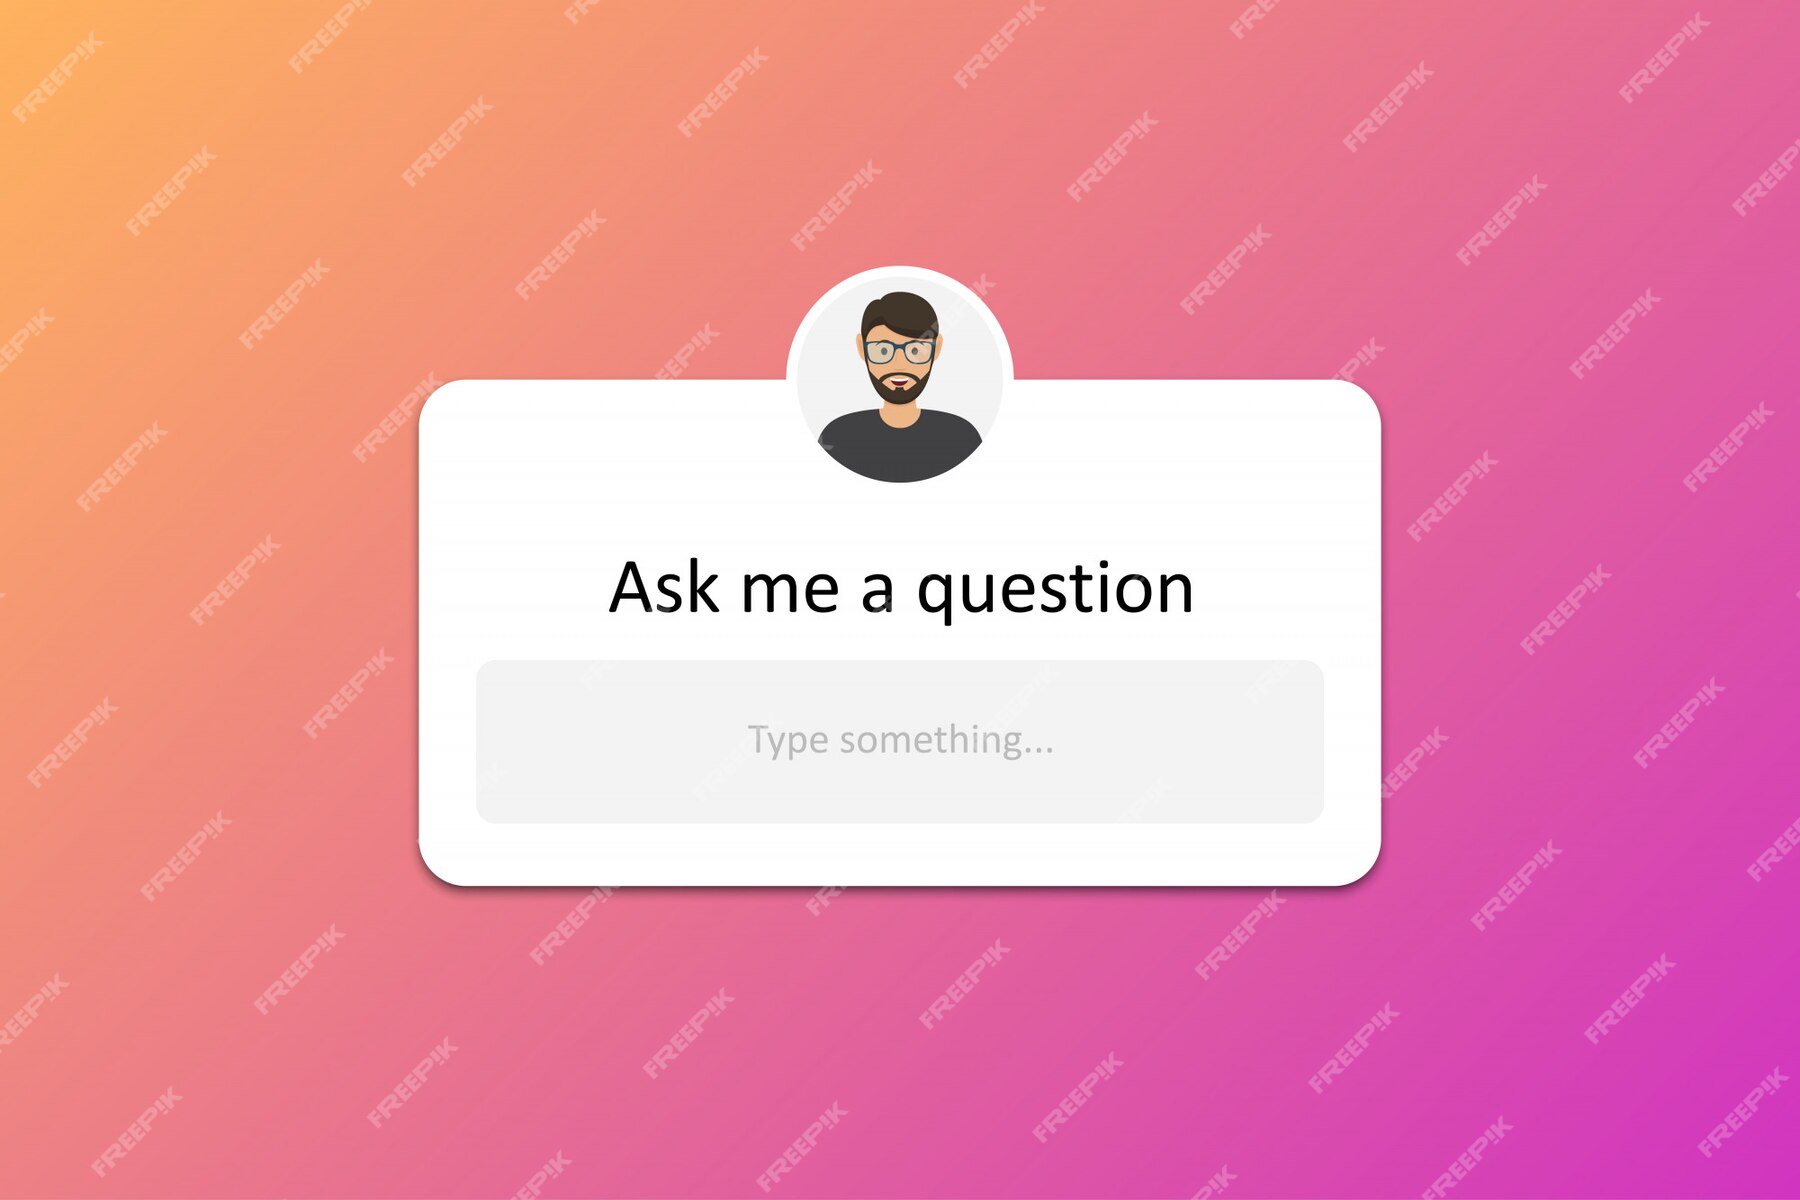 Premium Vector | Ask me a question interface frame in a flat design